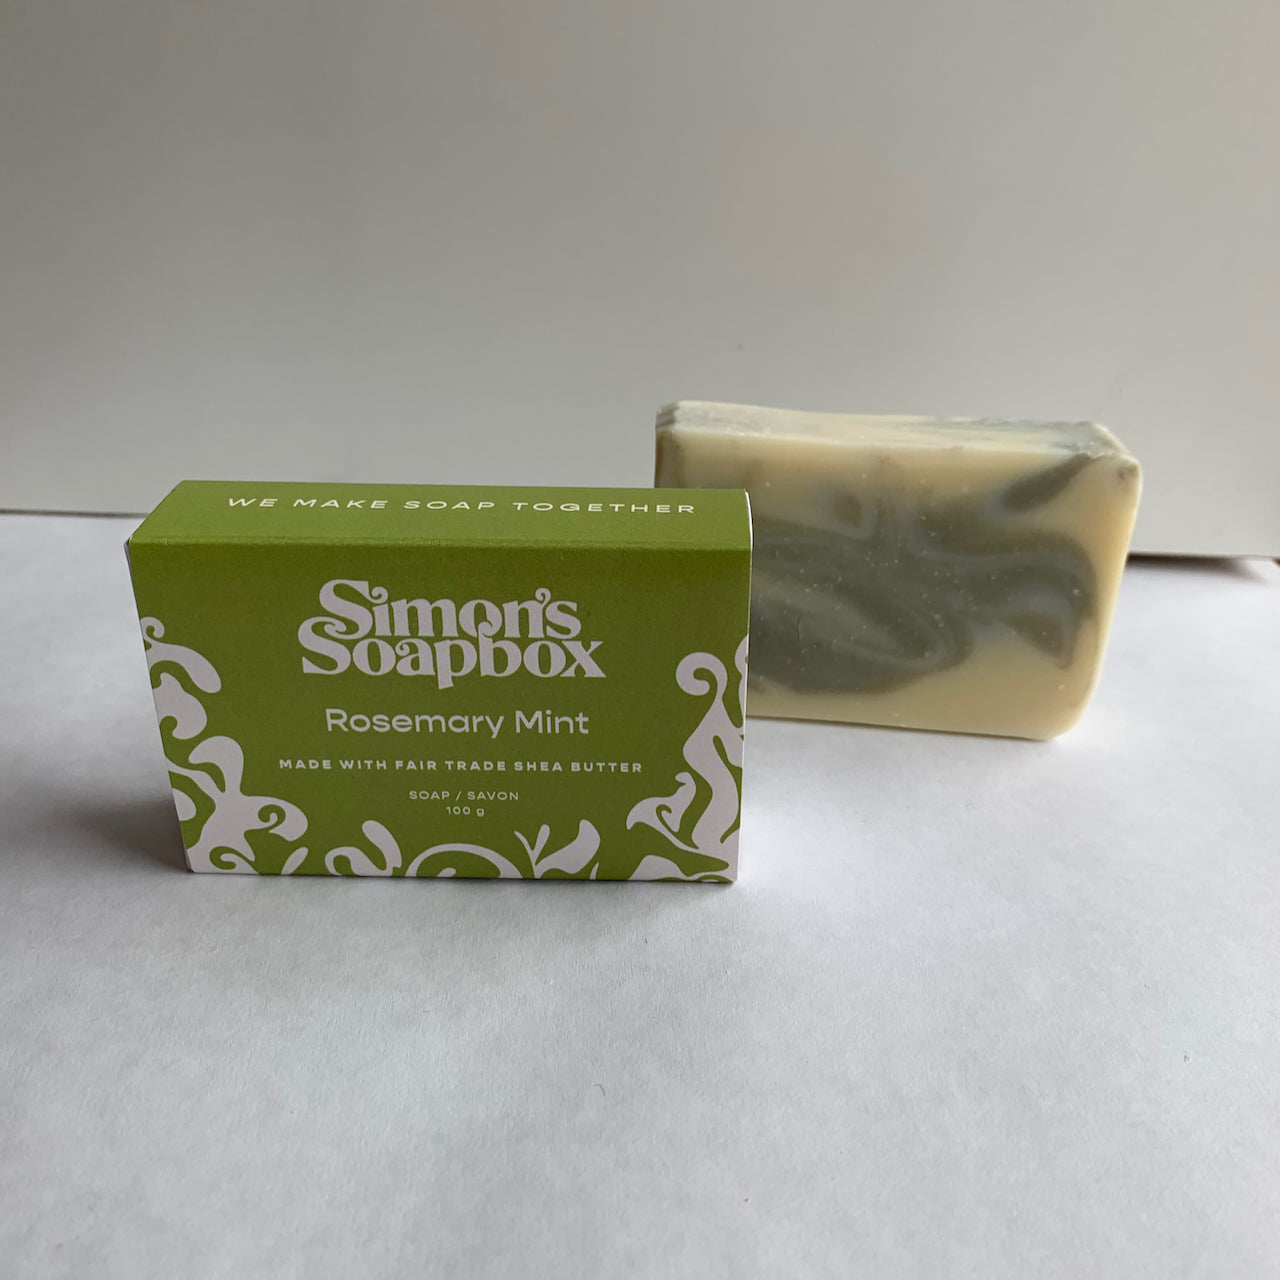 Rosemary Mint soap and candle set